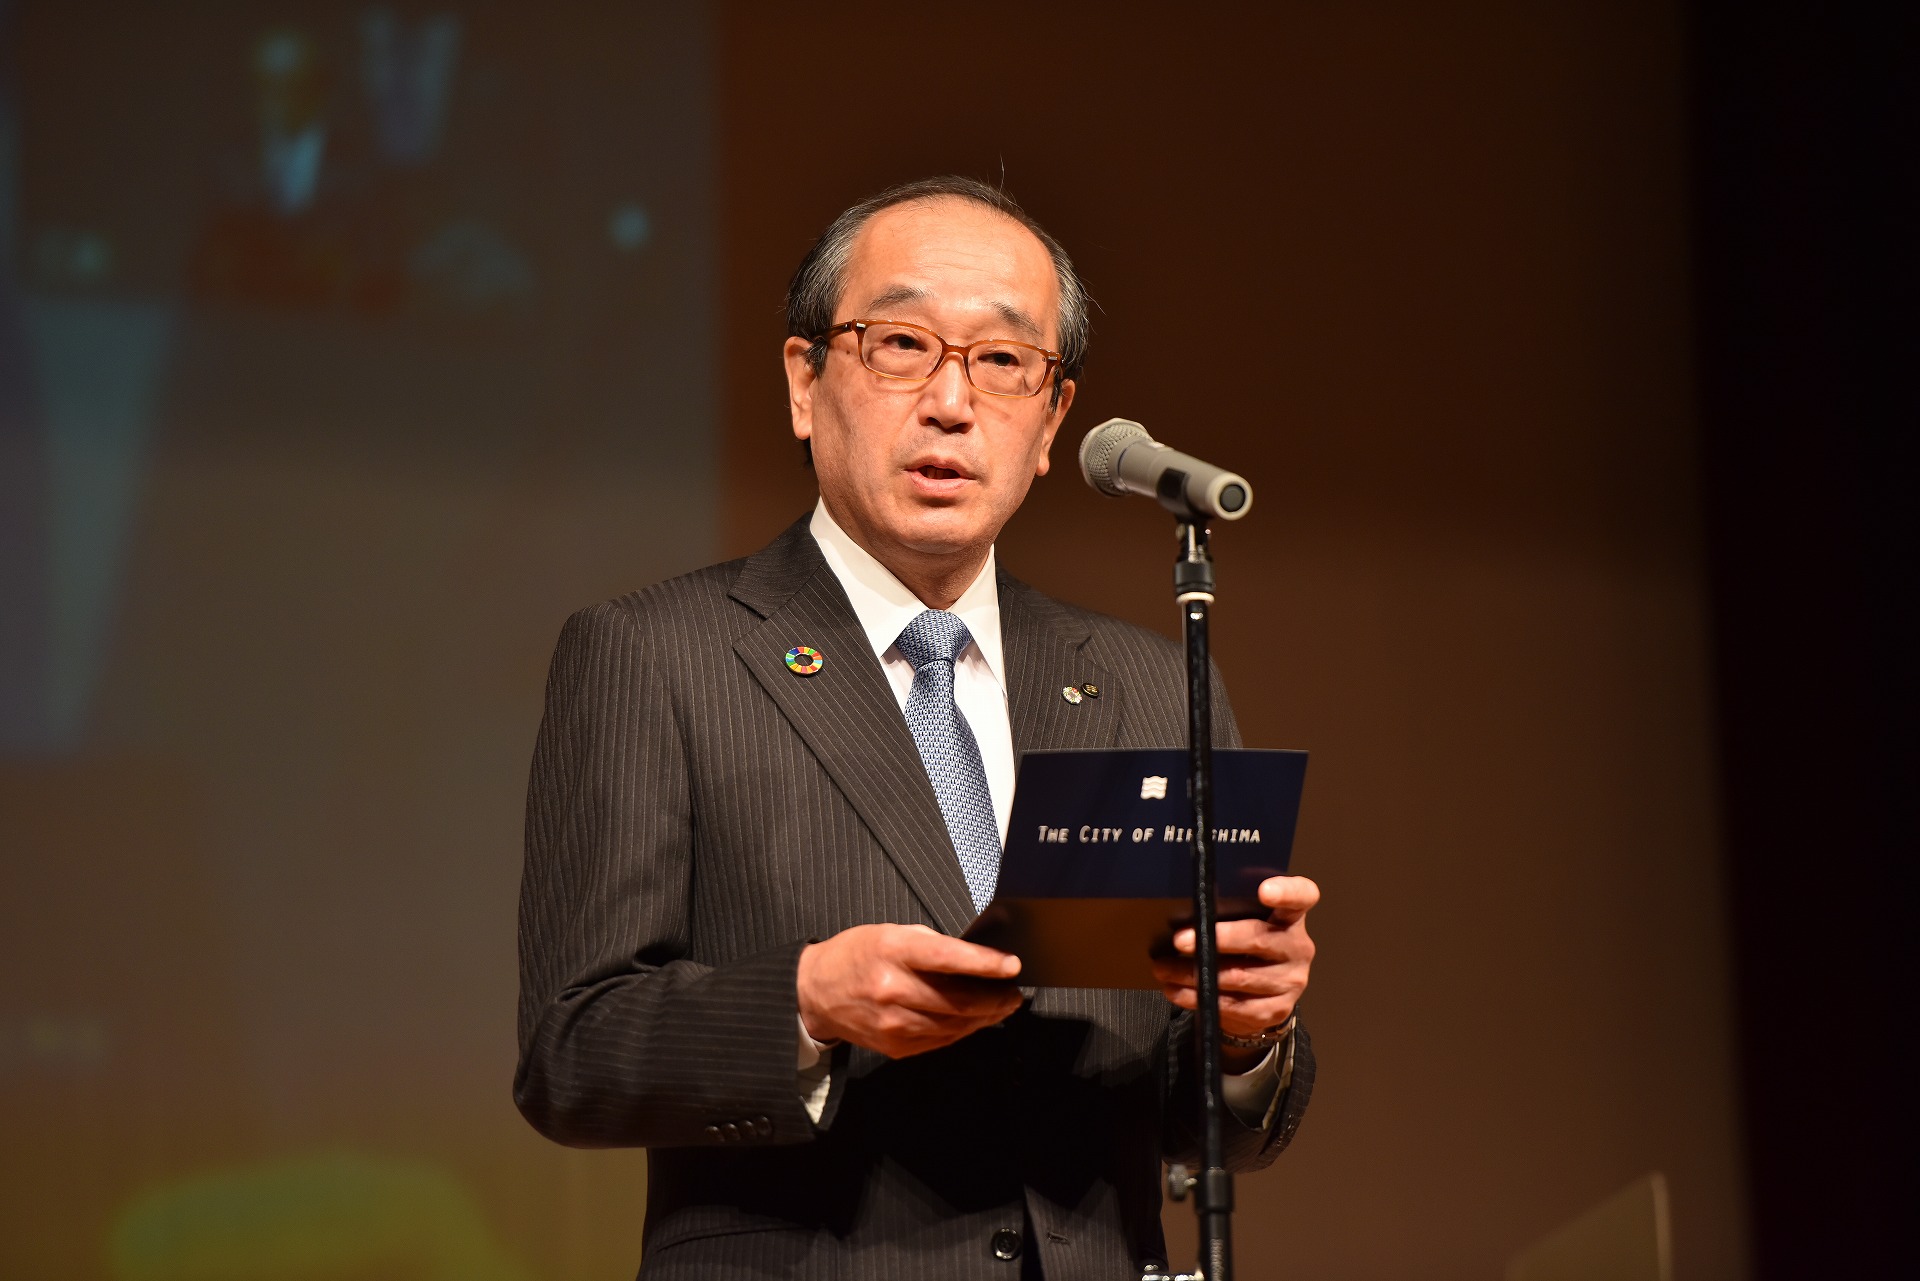 President Matsui’s opening remarks